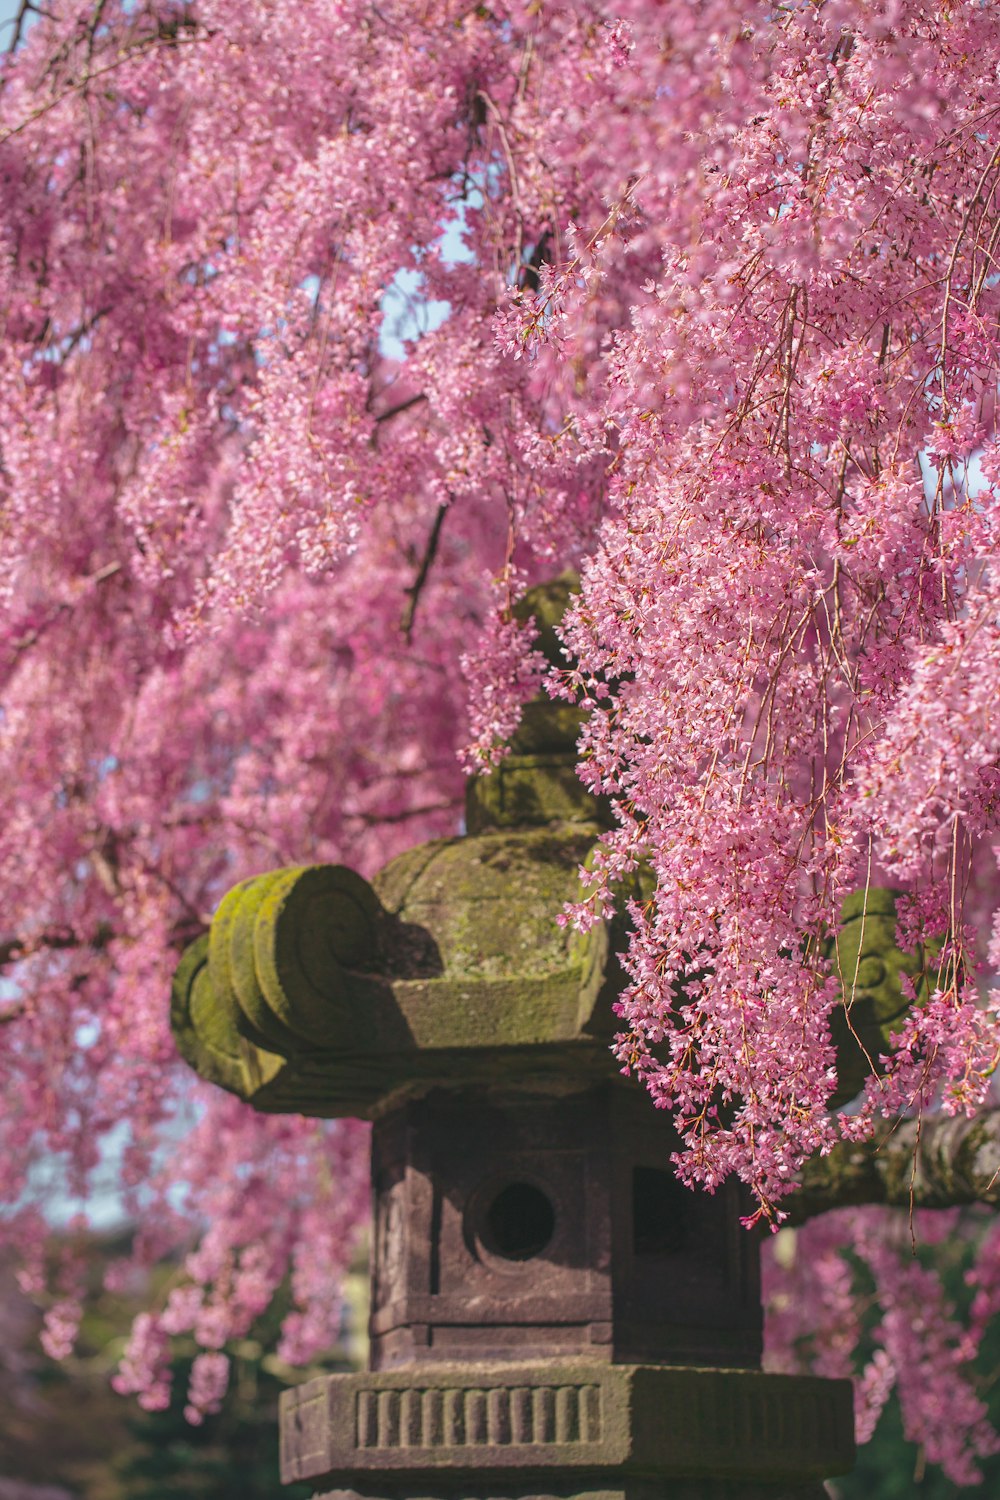 a birdhouse in front of a tree with pink flowers